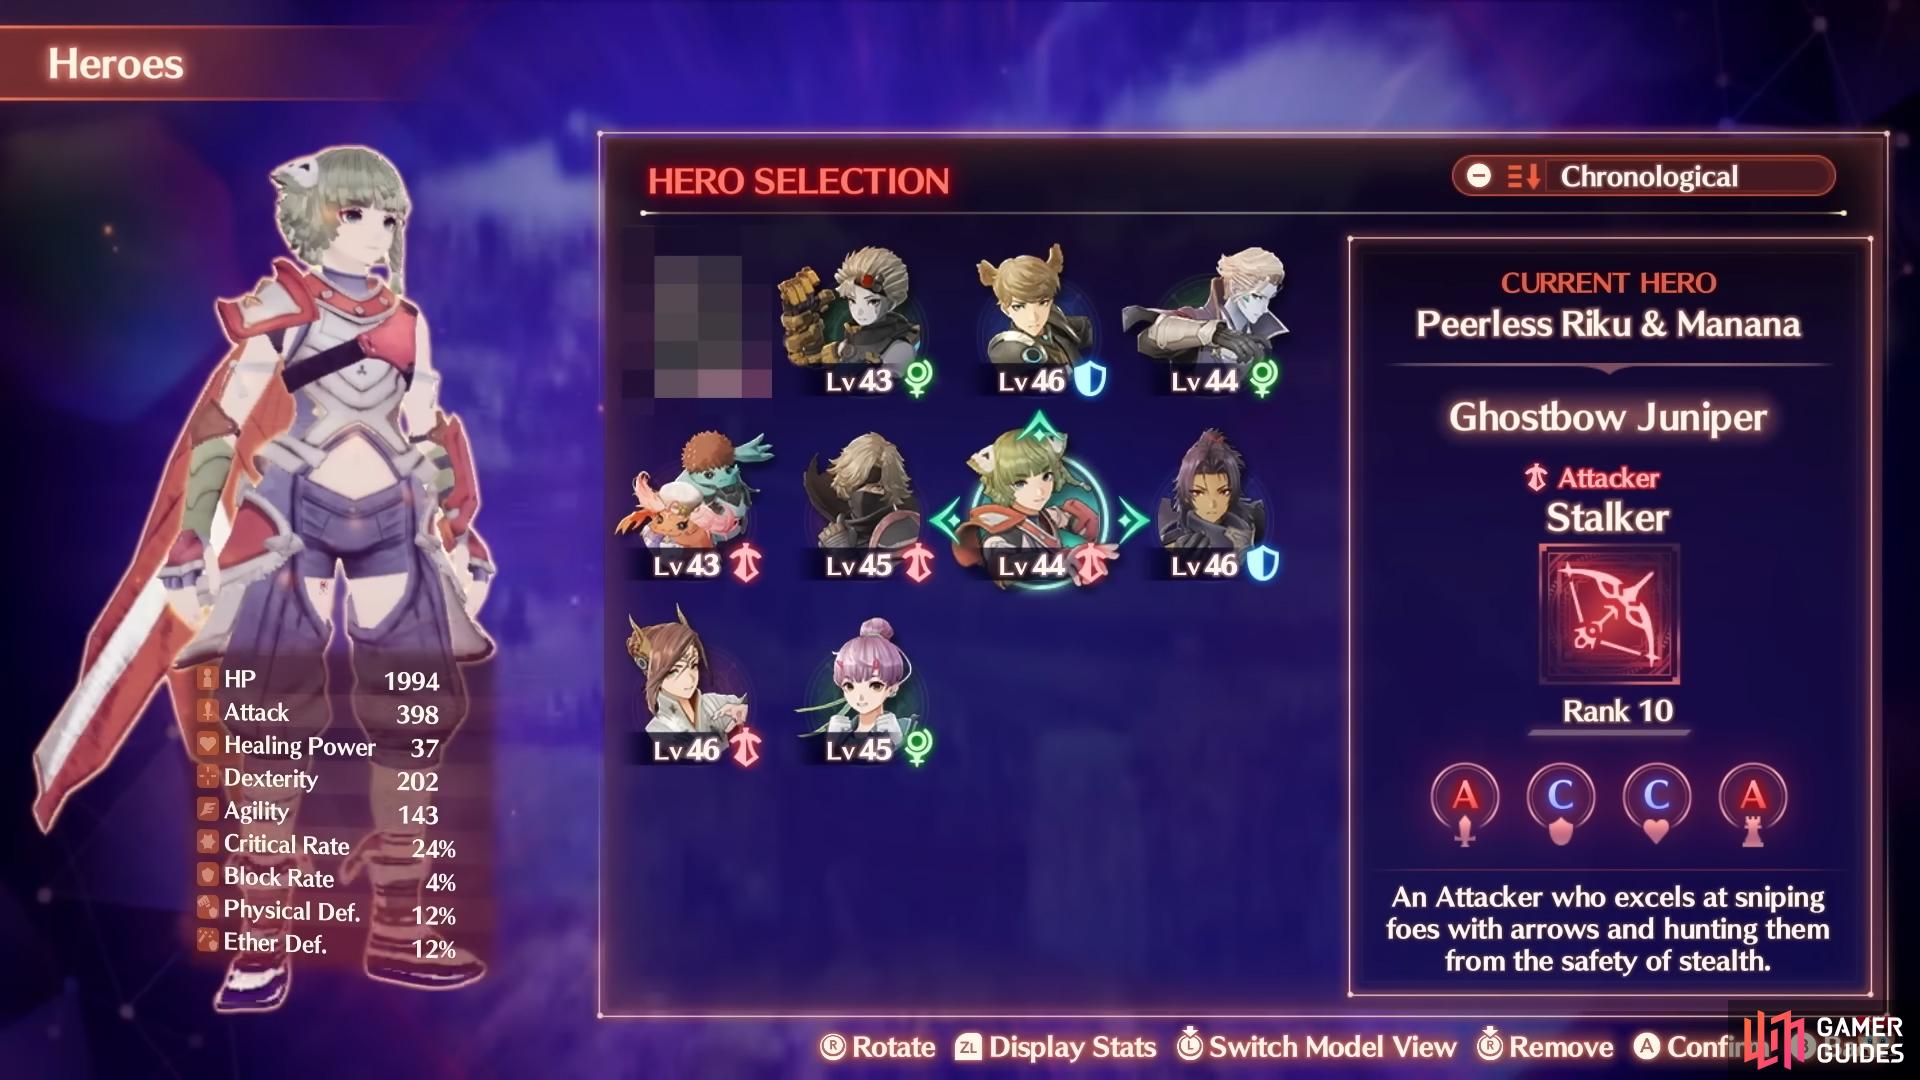 Xenoblade Chronicles 3 classes: what should you play as?